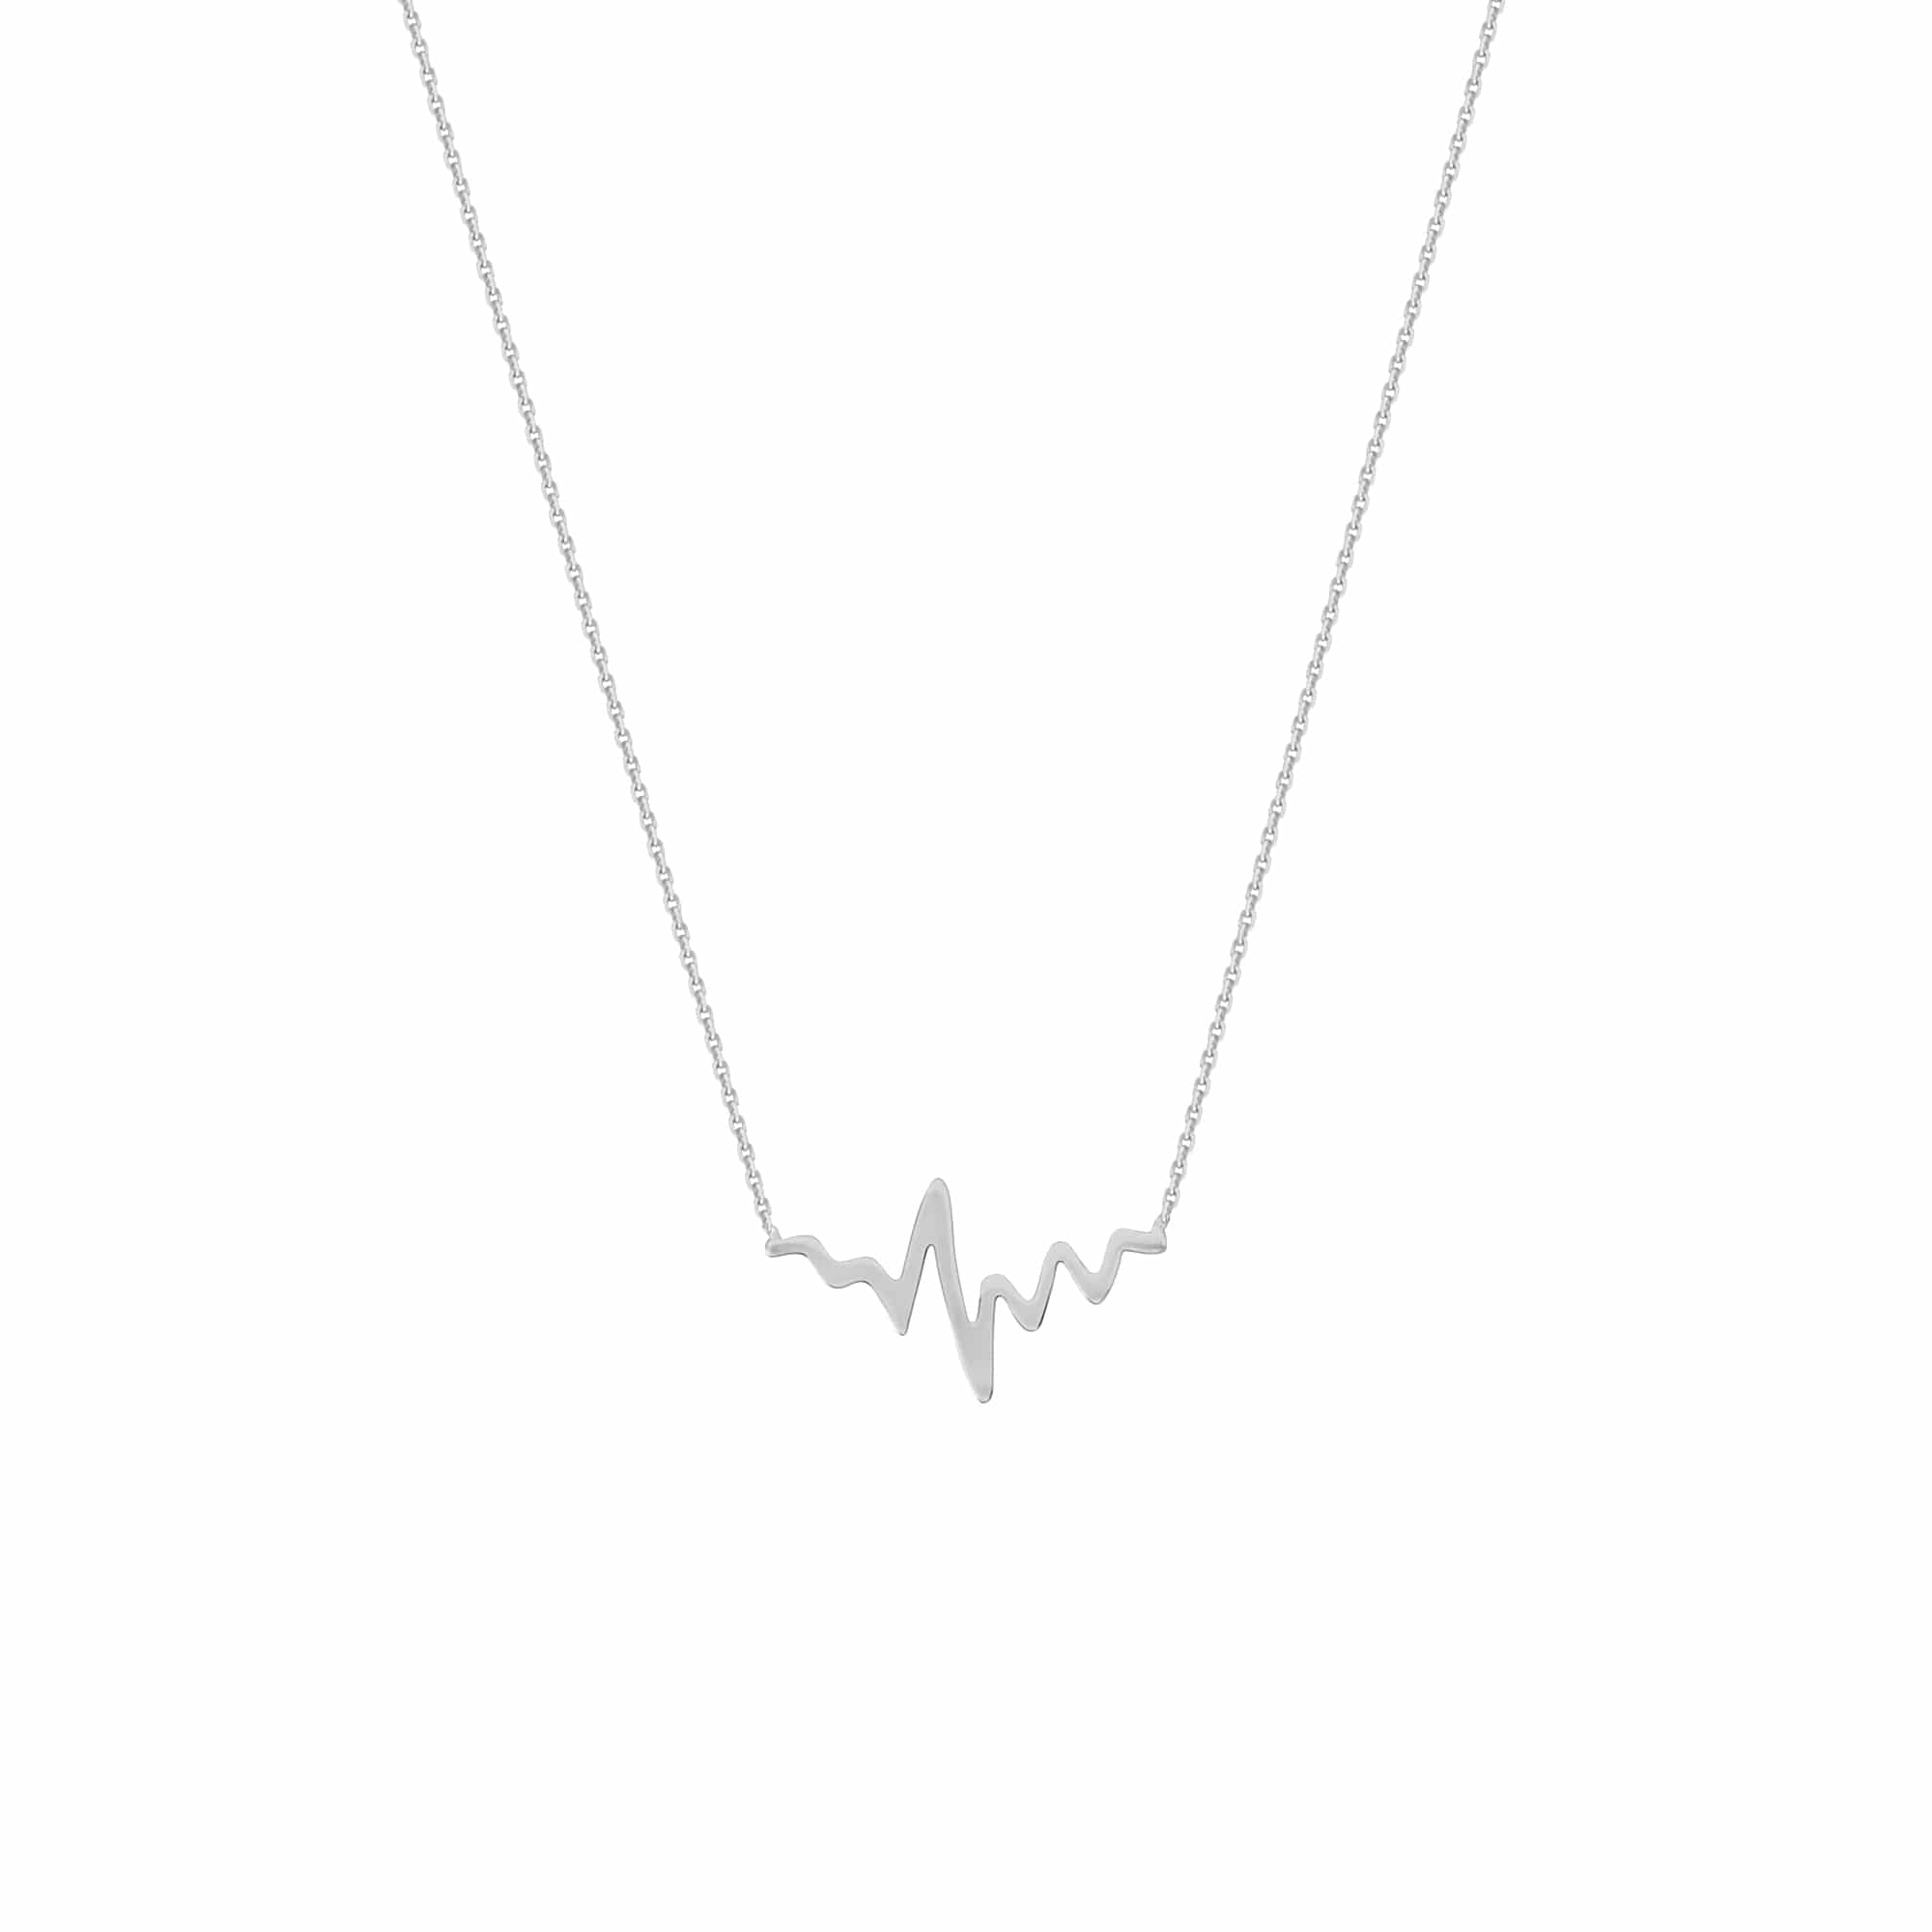 Heartbeat Necklace and Bracelet Gift Set in Sterling Silver - SHGS3008 -  Jewelry by Johan